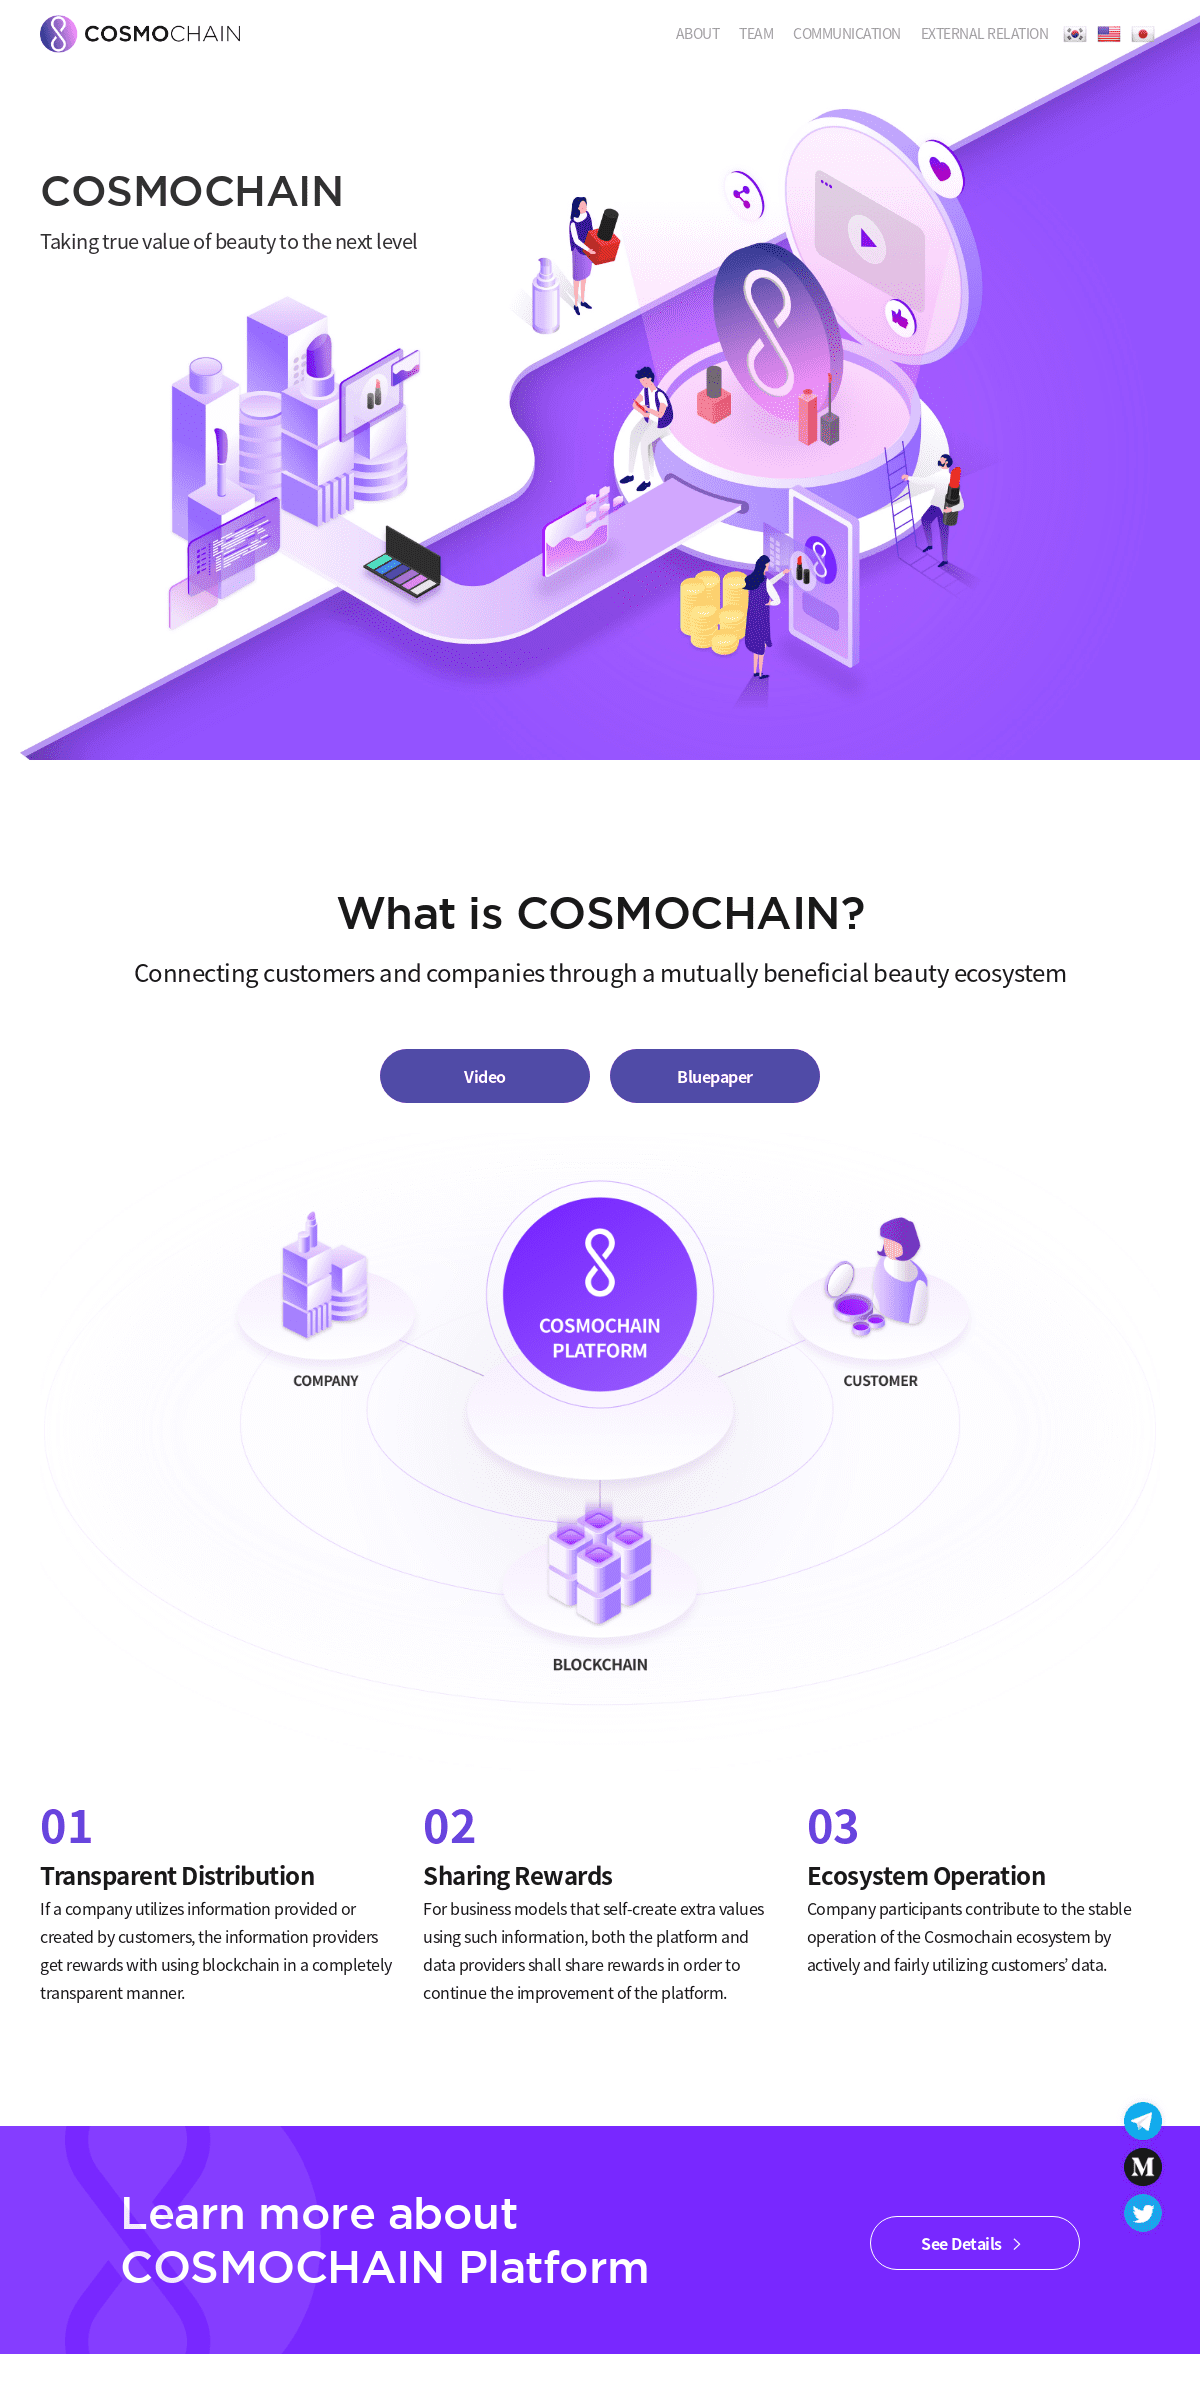 A complete backup of cosmochain.io